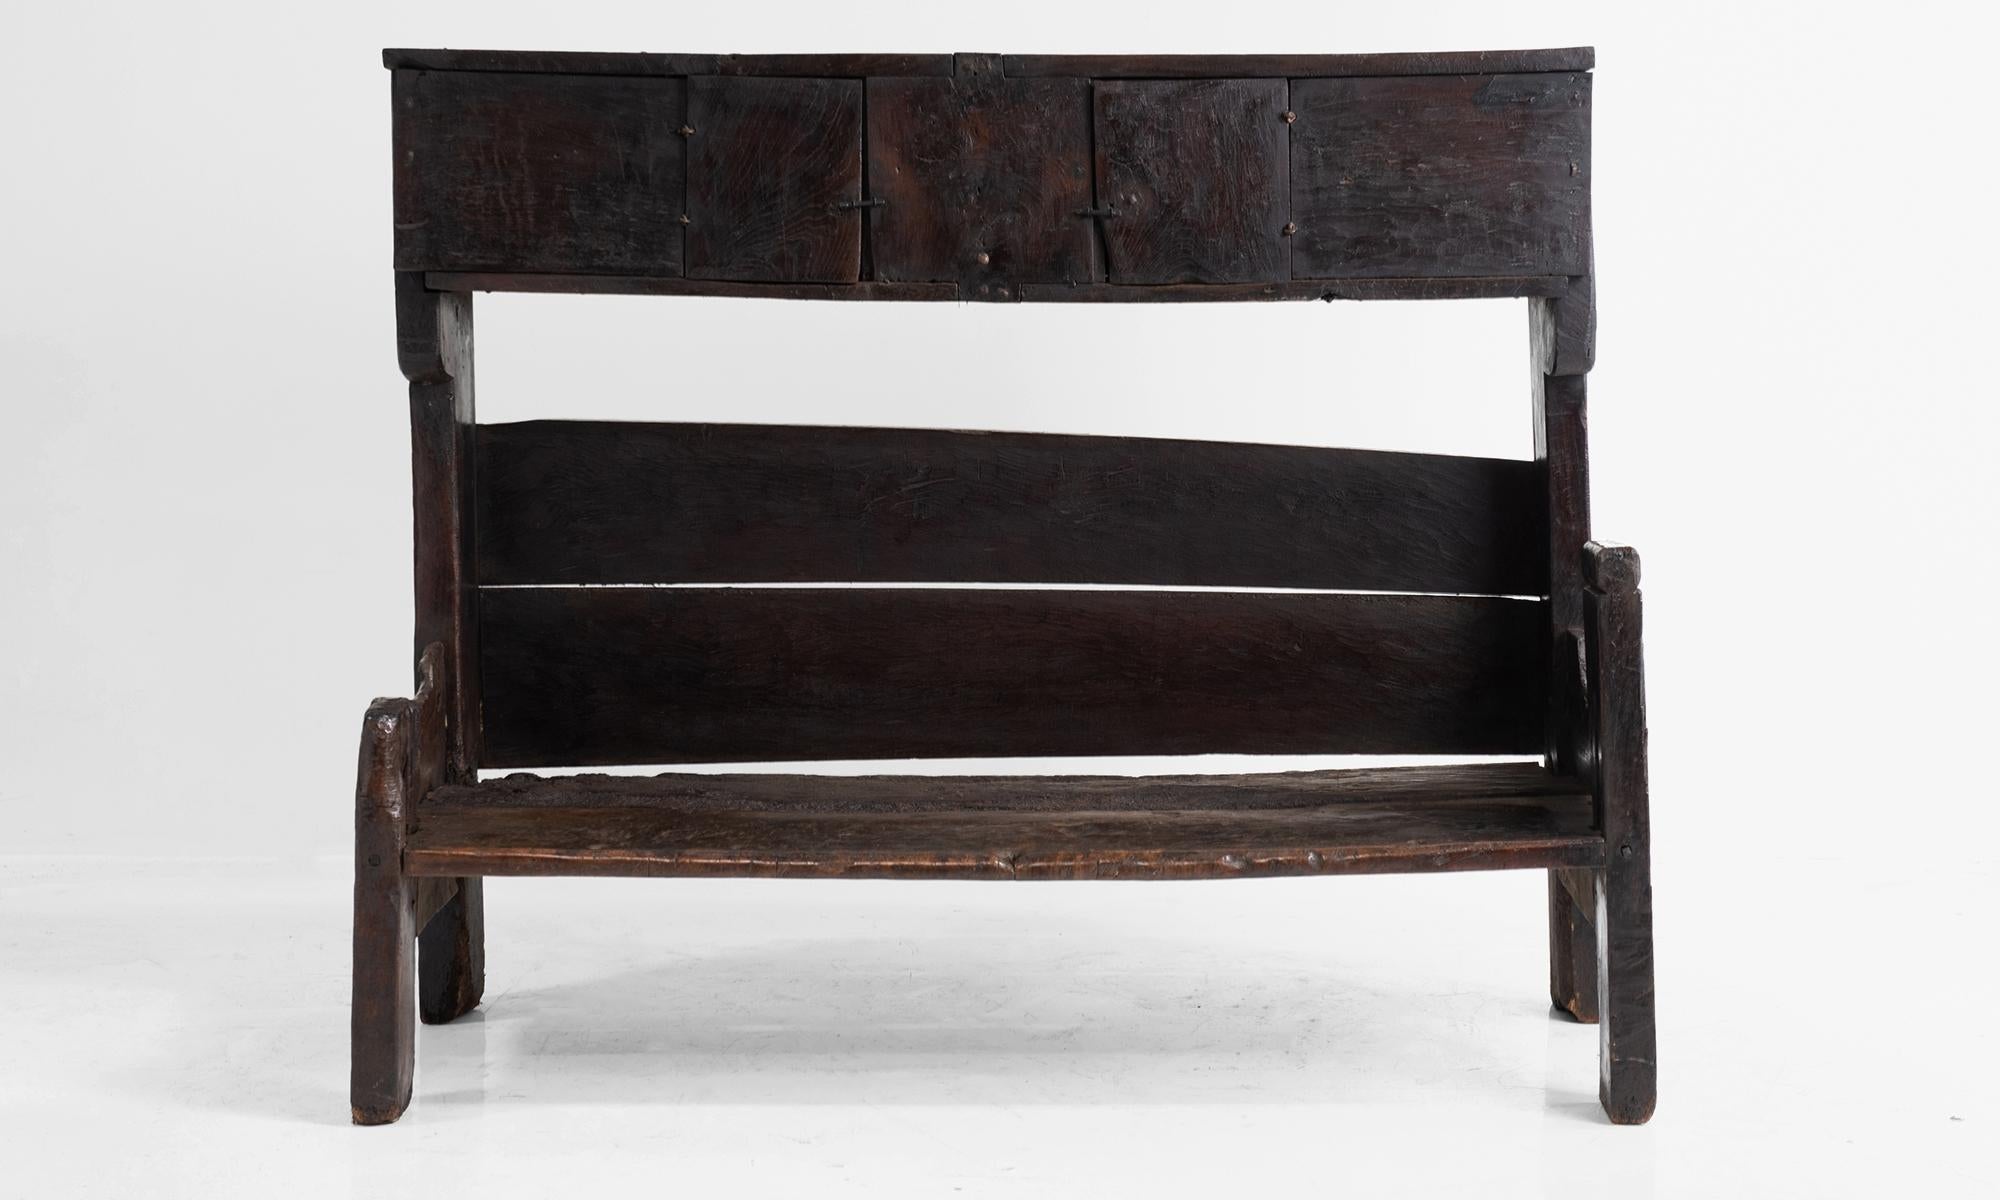 Incredibly unique bench recovered from a 15th century church in the Pyrenees Mountains. Constructed from slabs of heavy oak with storage above the bench.